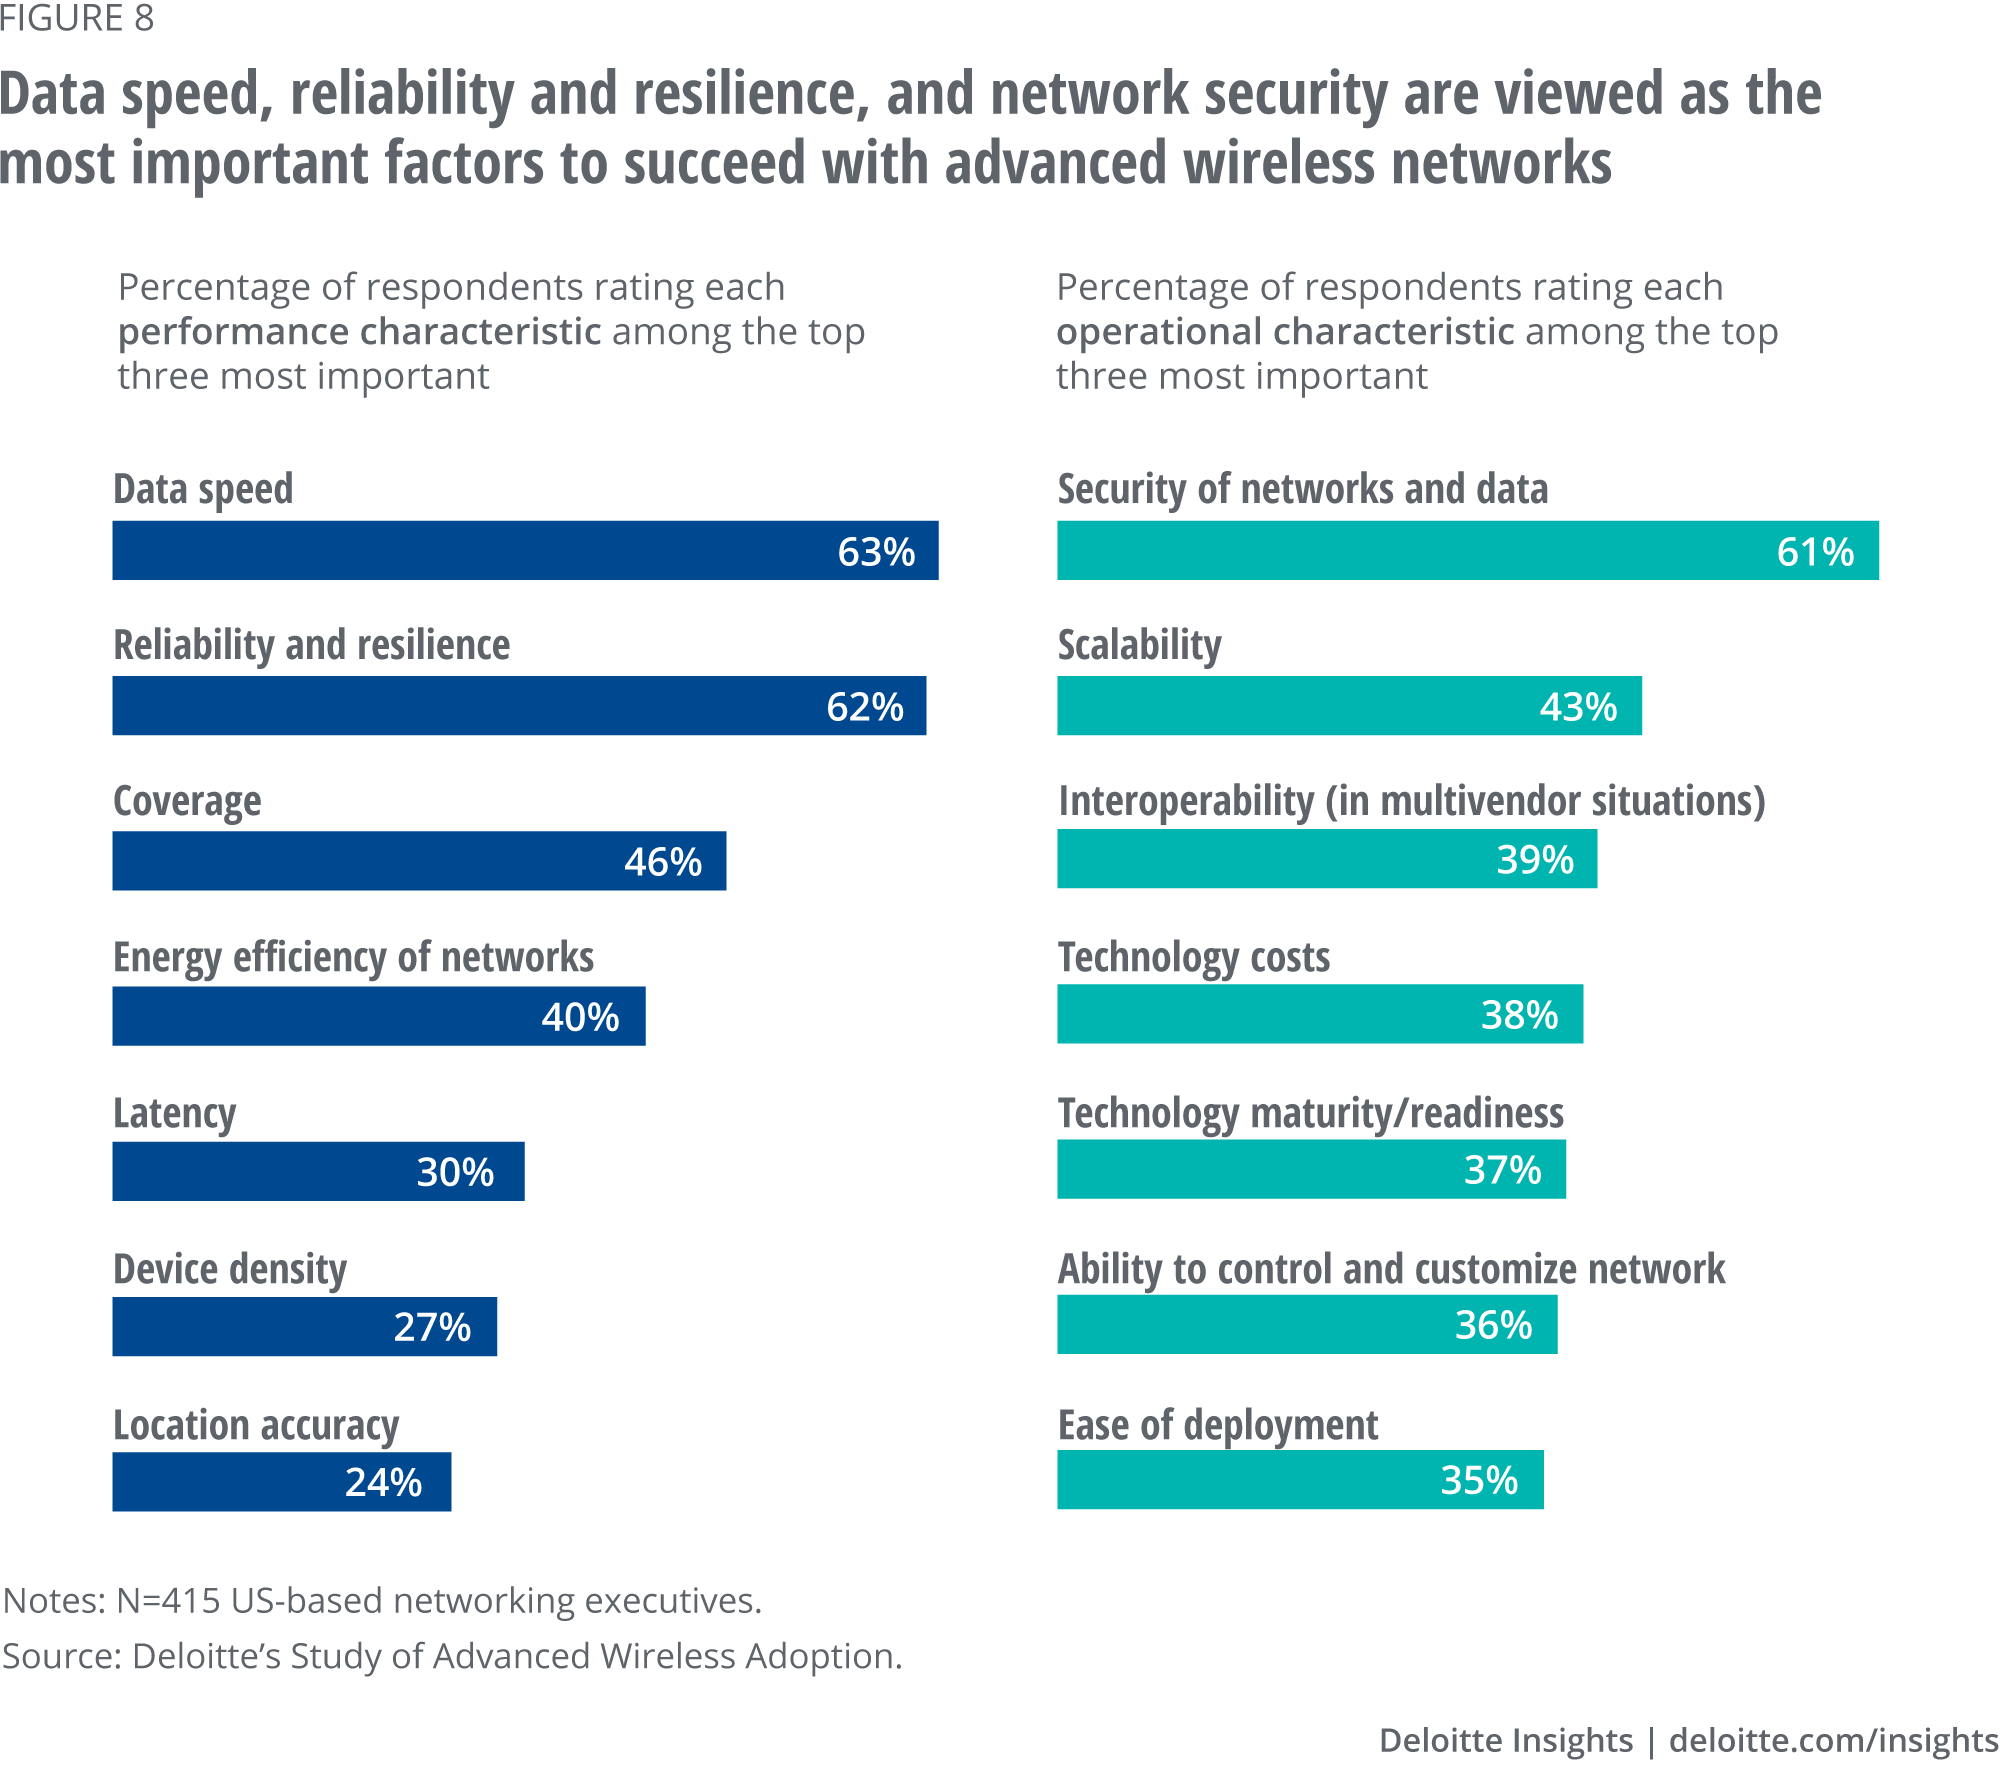 Data speed, reliability and resilience, and network security are viewed as the most important factors to succeed with advanced wireless